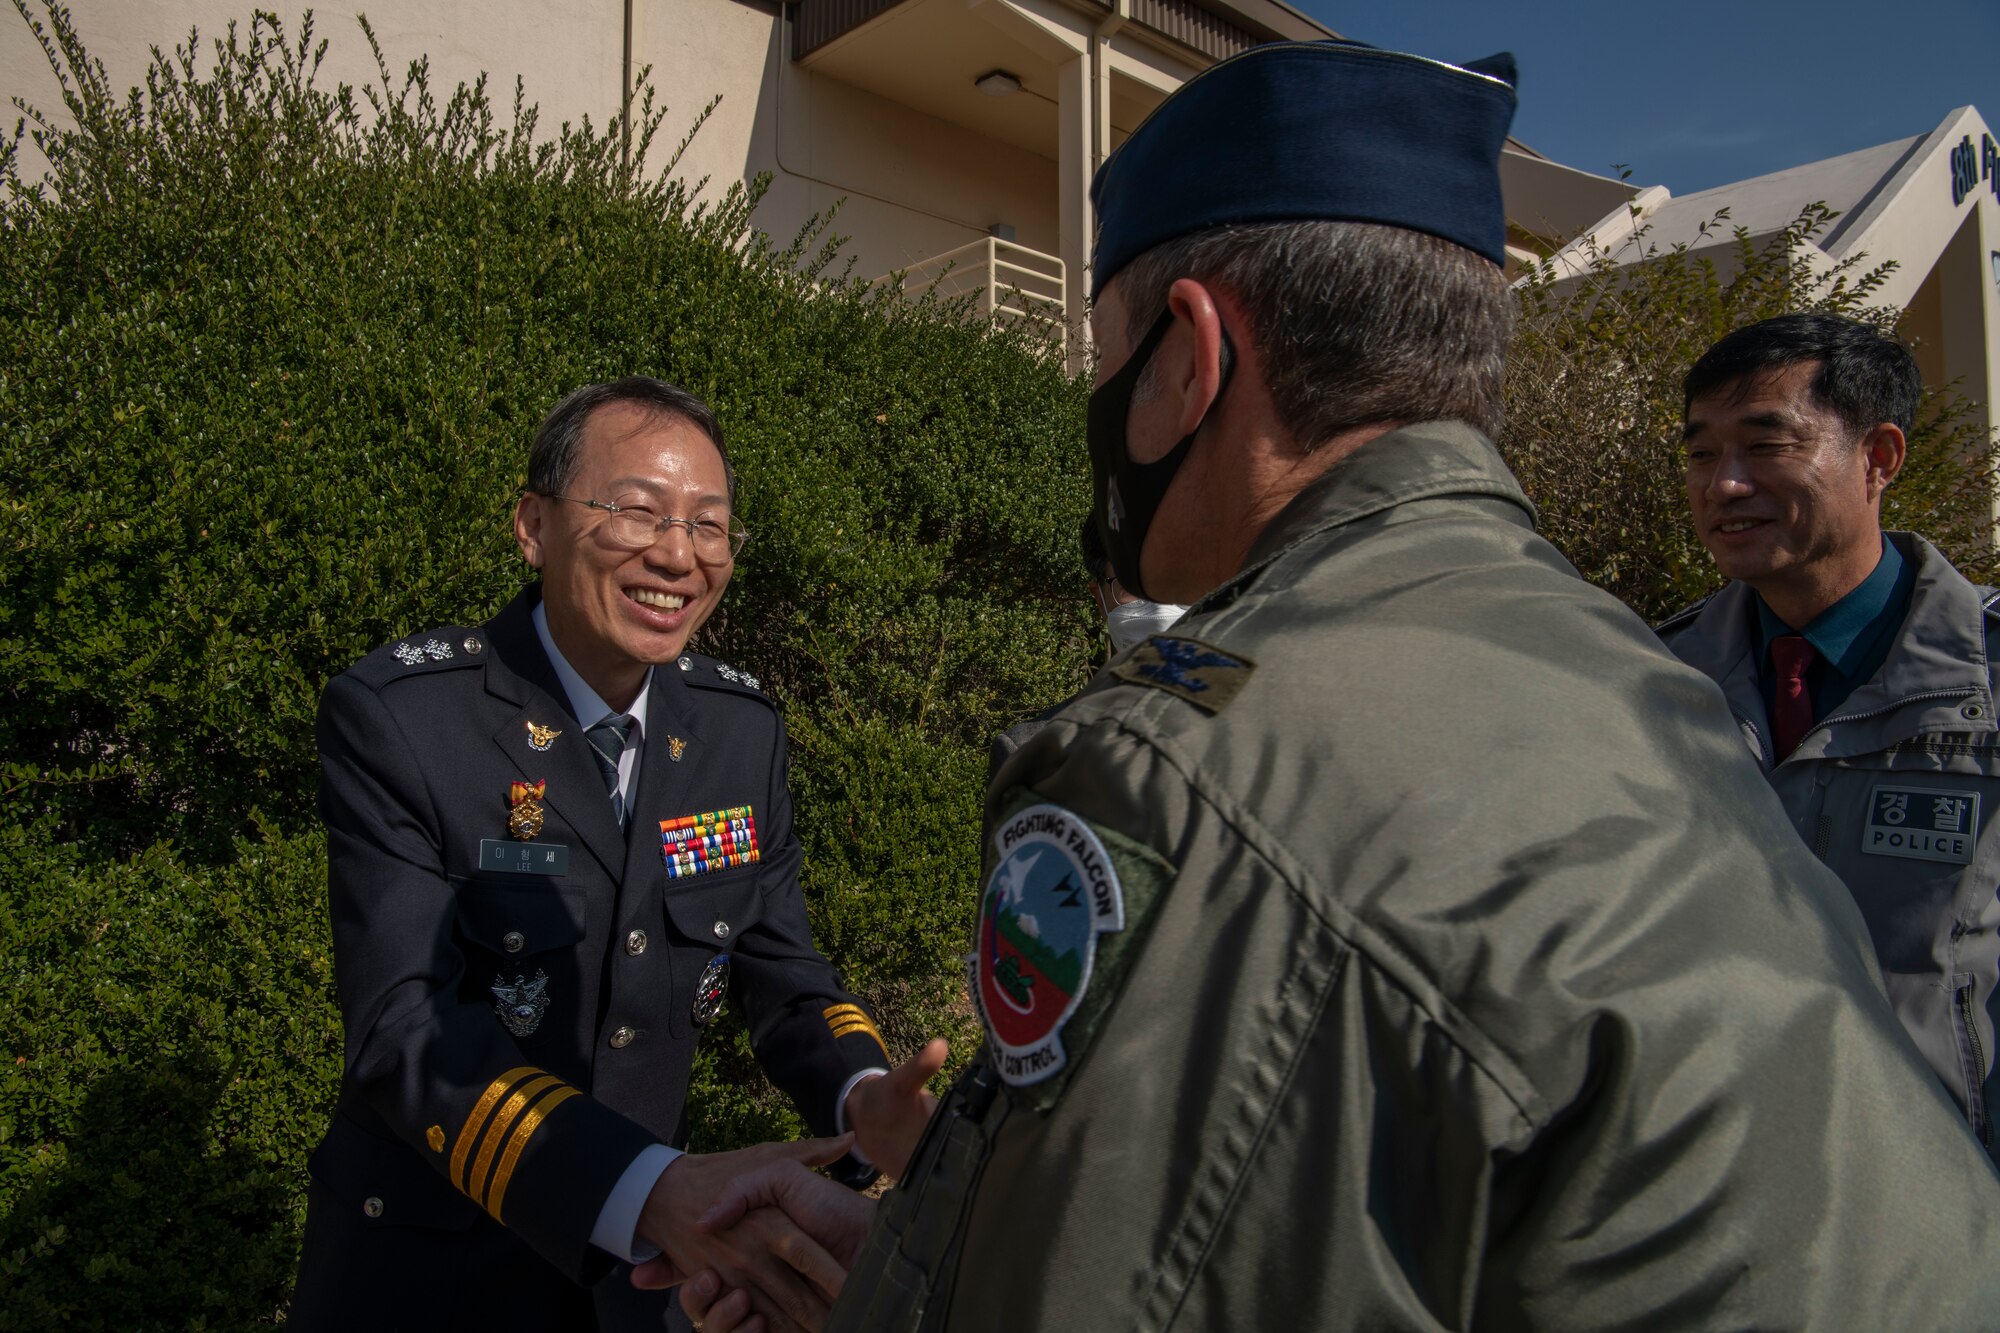 Mr. Yi Hyong-se, Korean National Police Commissioner of Jeonbuk Province shakes hands with Col. John “Wolf” Gallemore, 8th Fighter Wing commander, during an immersion tour at Kunsan Air Base, Republic of Korea, Nov. 17, 2021. Kunsan hosts an immersion tour for the KNP biannually to provide updates on the economic impact Kunsan has on the local area. (U.S. Air Force photo by Staff Sgt. Jesenia Landaverde)